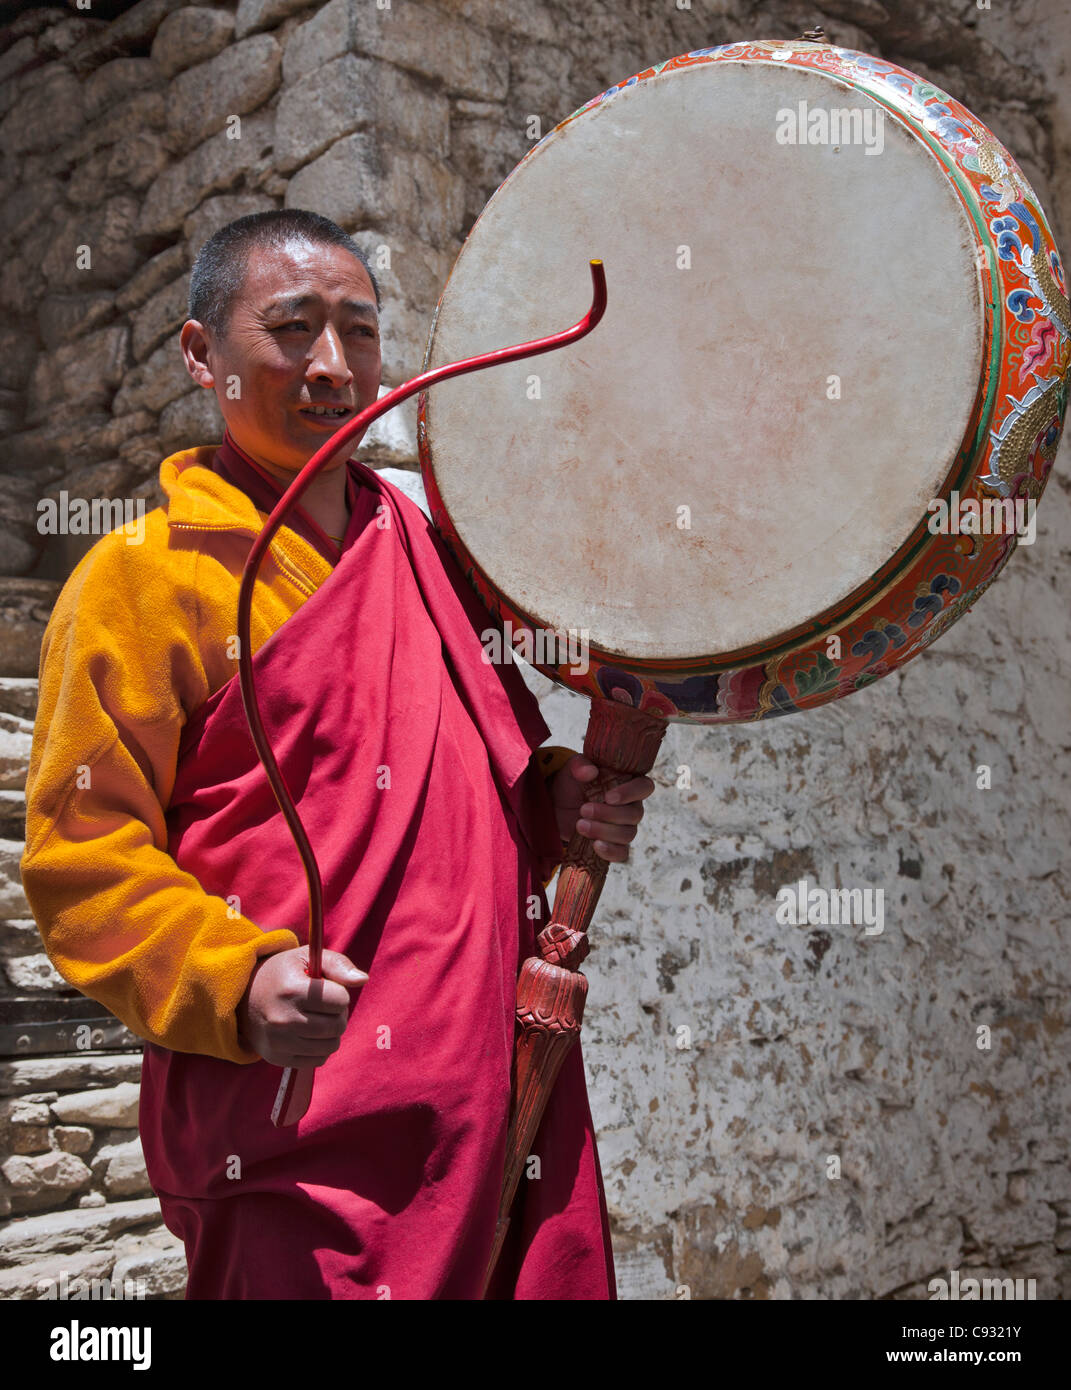 A Buddhist monk at the Kurjey Lhakhang temple with a ceremonial nga chen drum. Stock Photo